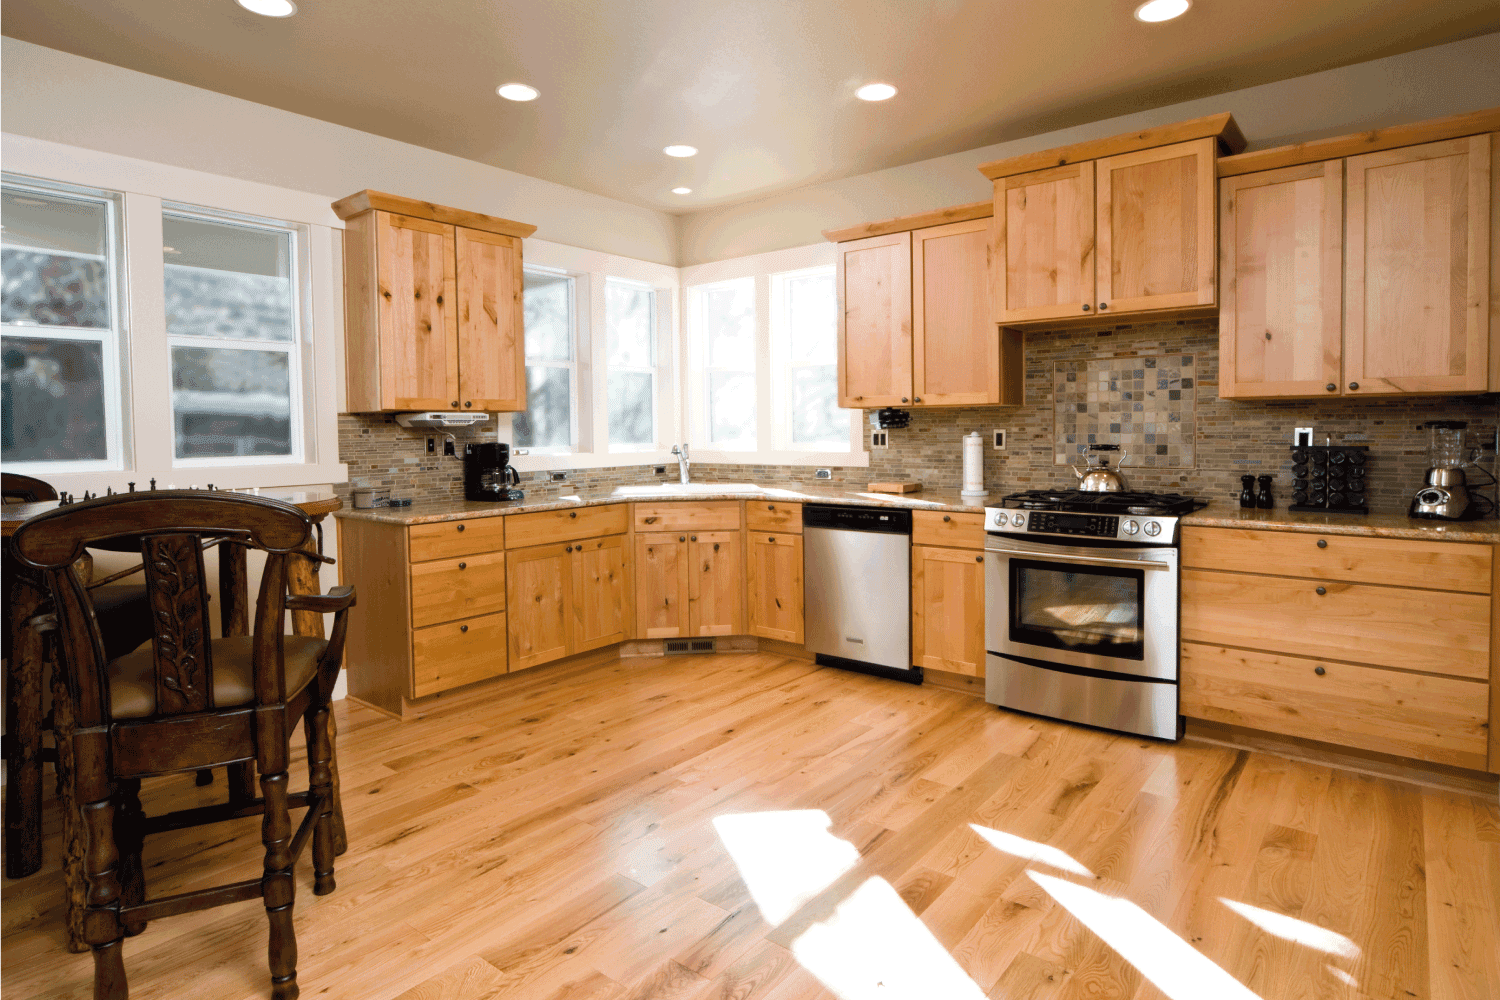 modern kitchen, has knotted alder cabinets, brick details on the walls and back splash. The hardwood floors complete the beauty of this kitchen.